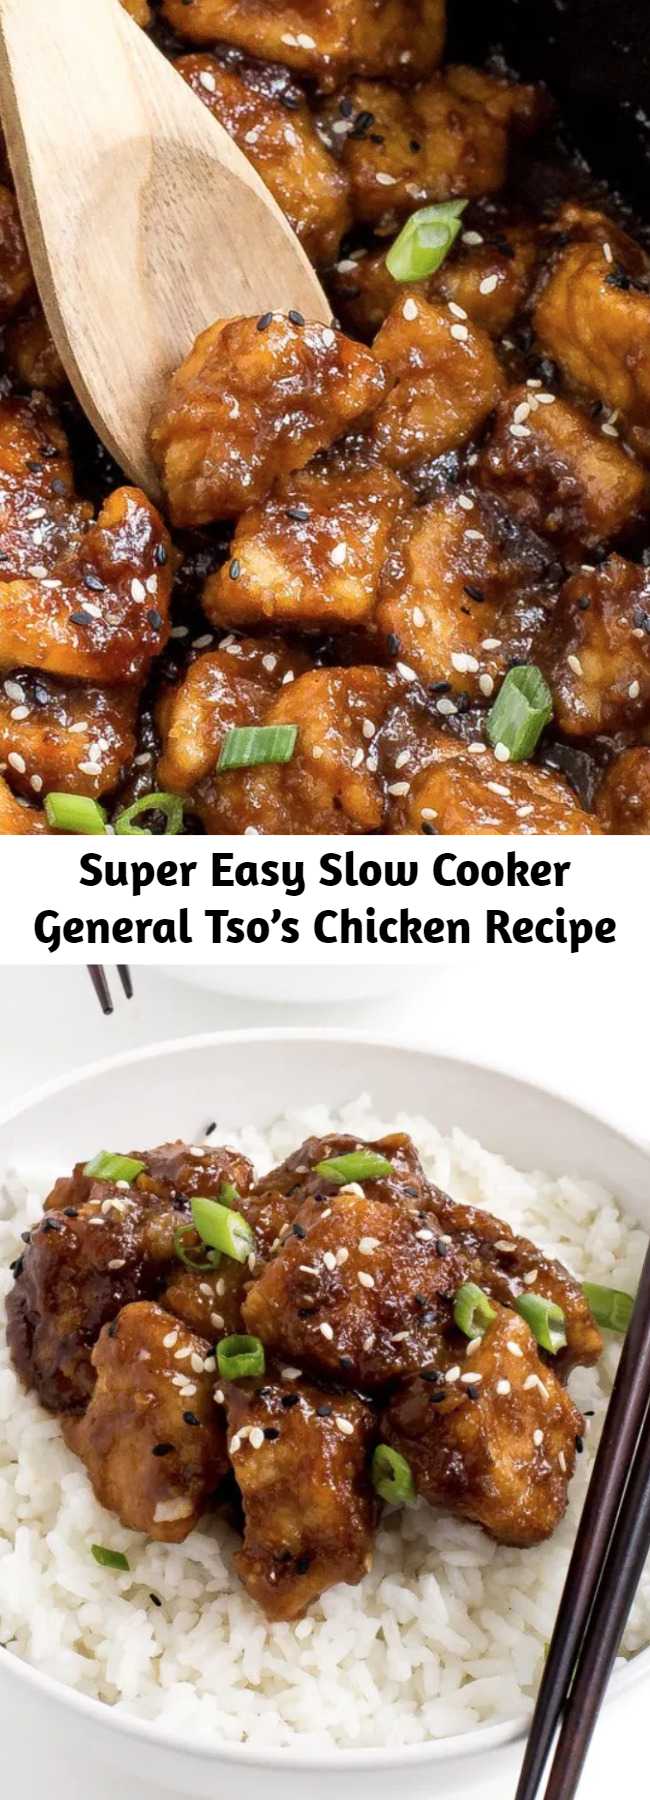 Super Easy Slow Cooker General Tso’s Chicken Recipe - Super Easy 30 minute General Tso’s Chicken. Pan fried chicken tossed in a sweet and sticky sauce. So much better and healthier than takeout! This recipe is the perfect healthy comfort food anytime of the year. #generaltso #generaltsoschicken #chicken #asianfood #chinese